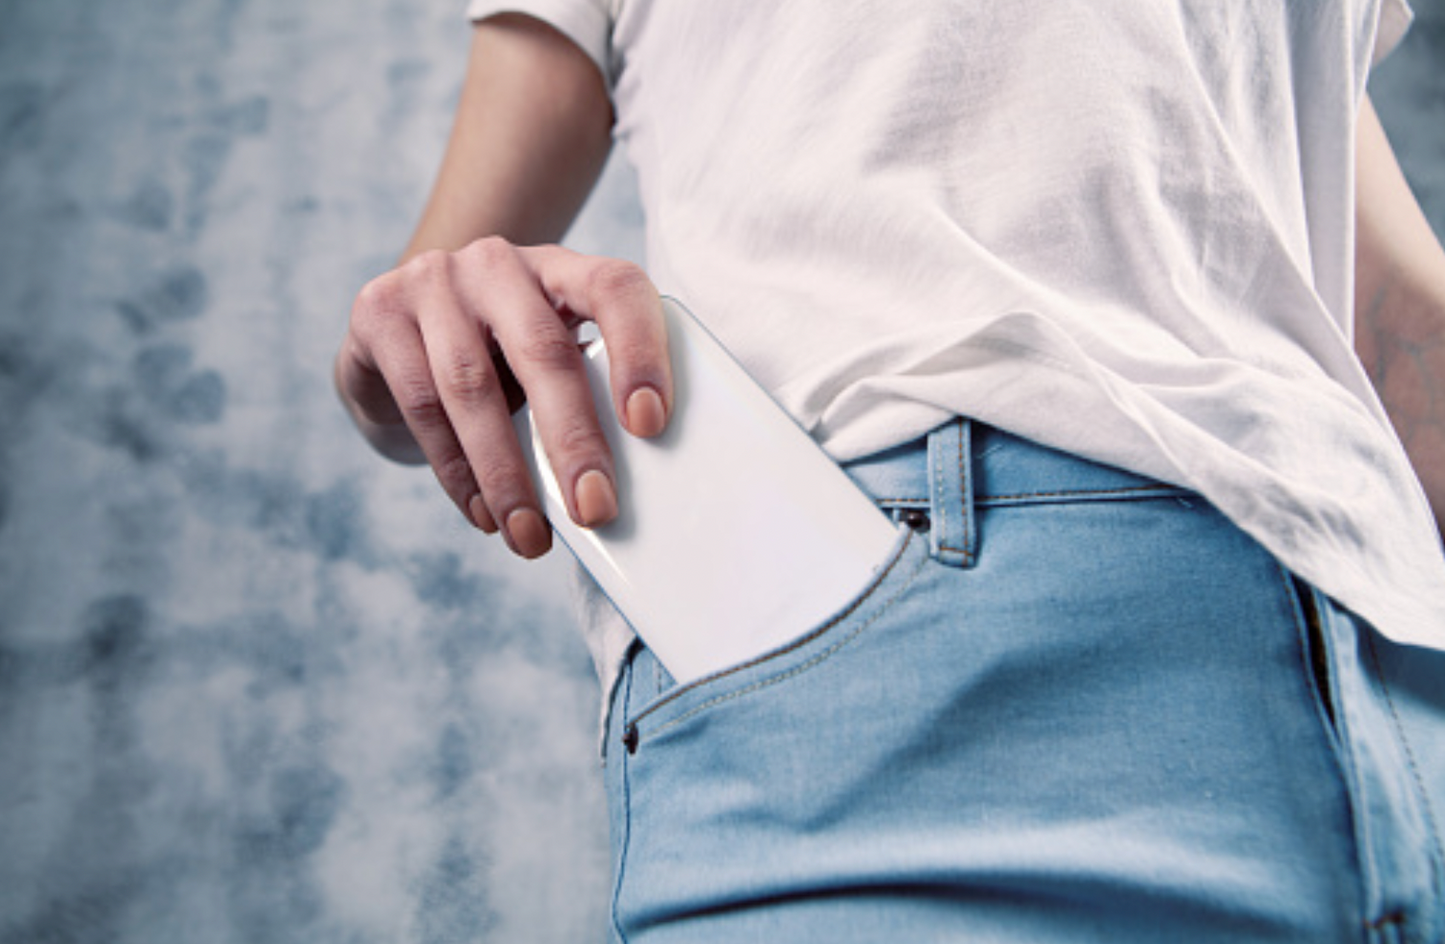 Women's Jeans With Pockets Big Enough To Hold A Smartphone